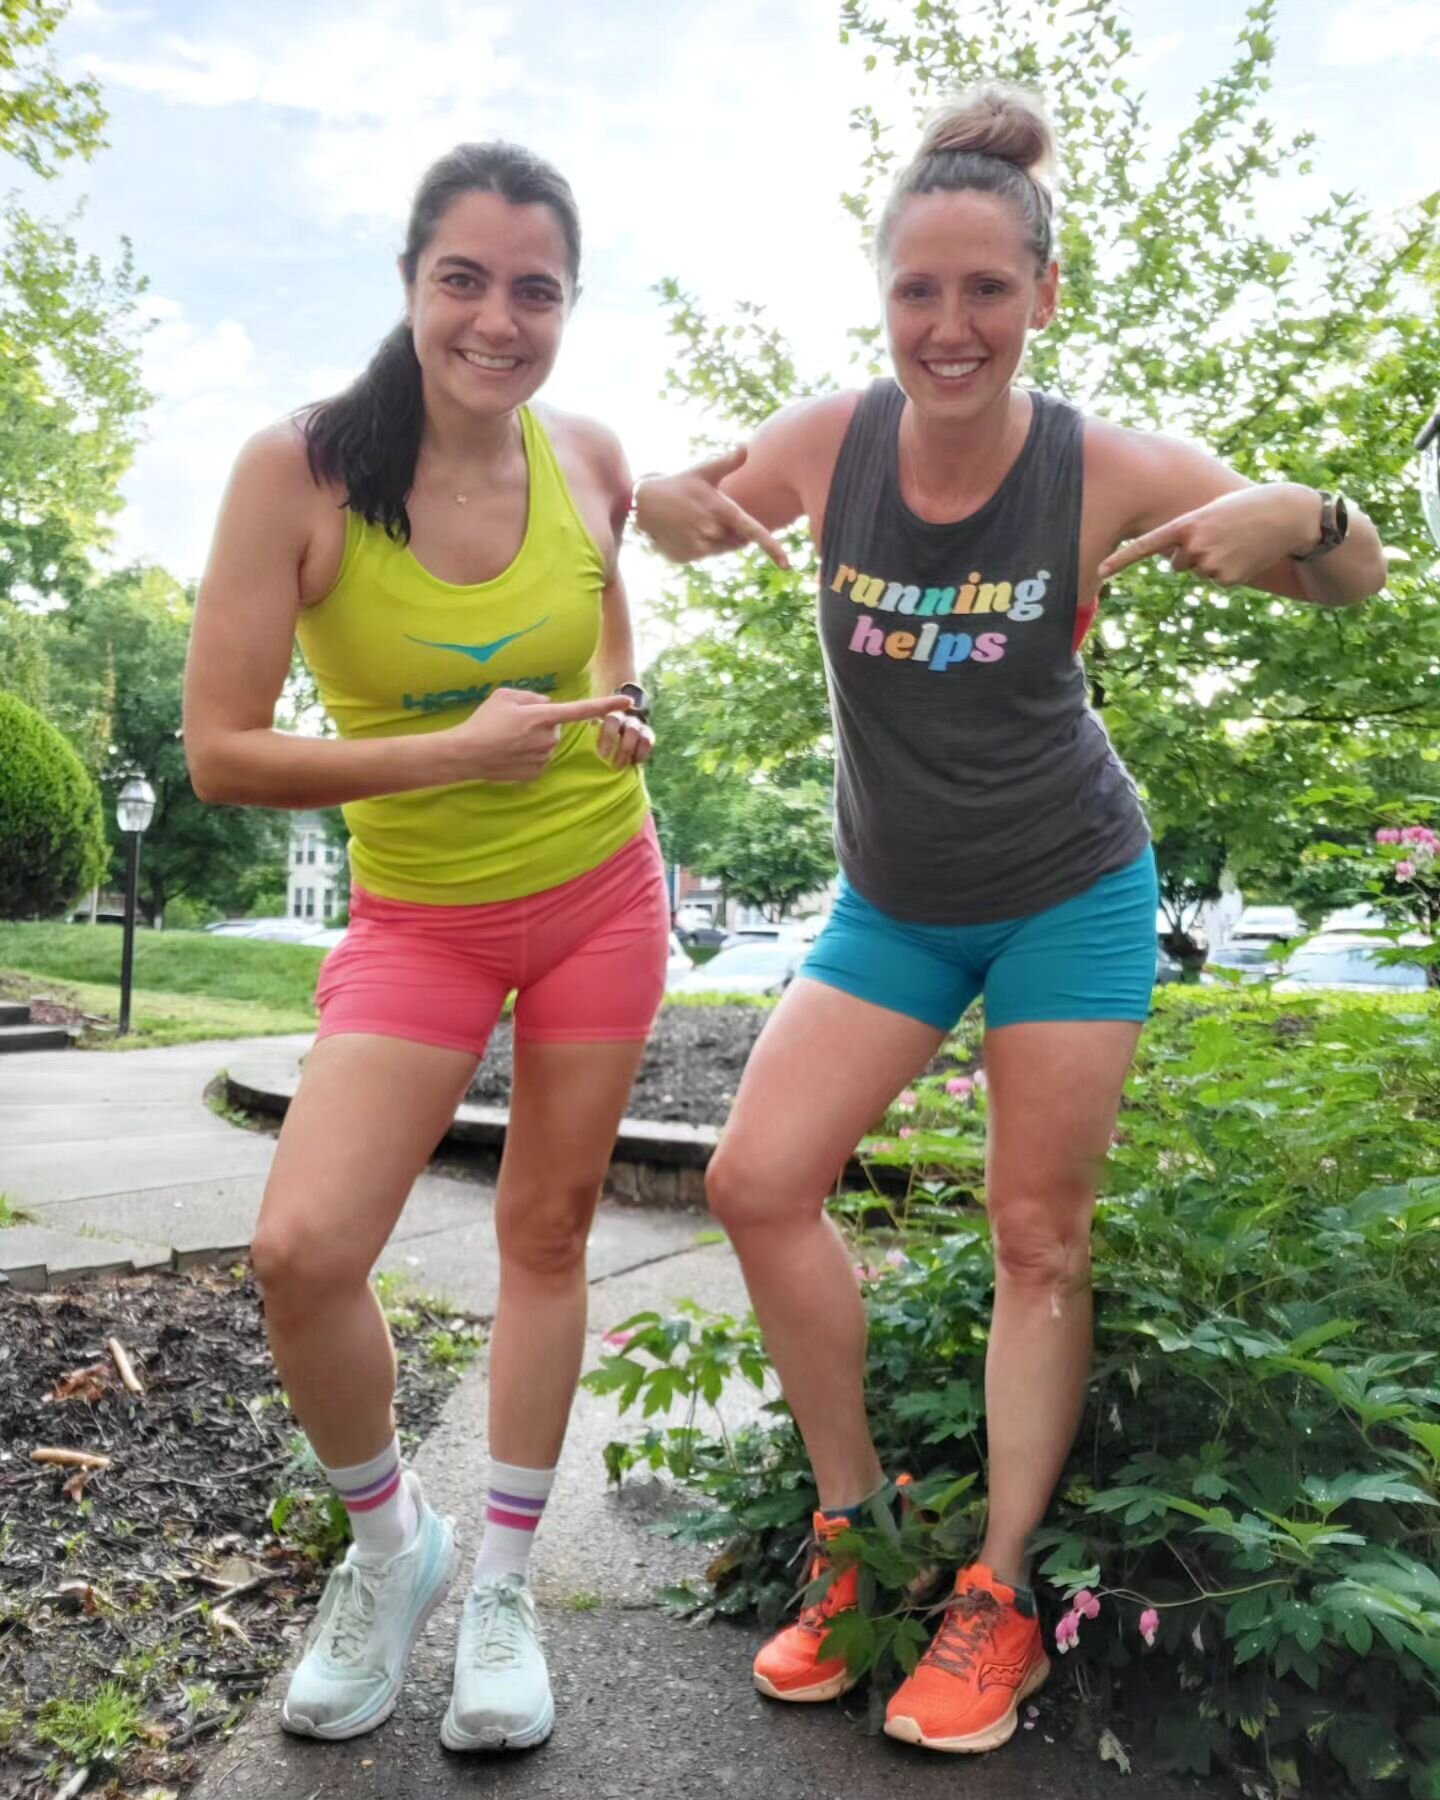 You guys! If you run, you are a runner. And if you run, no matter what you are going through in life, running helps!!

Can @sparkleathletic and @mileposts pretty please bring this tank back? It's our favorite! 💕

Super easy recovery miles this morni